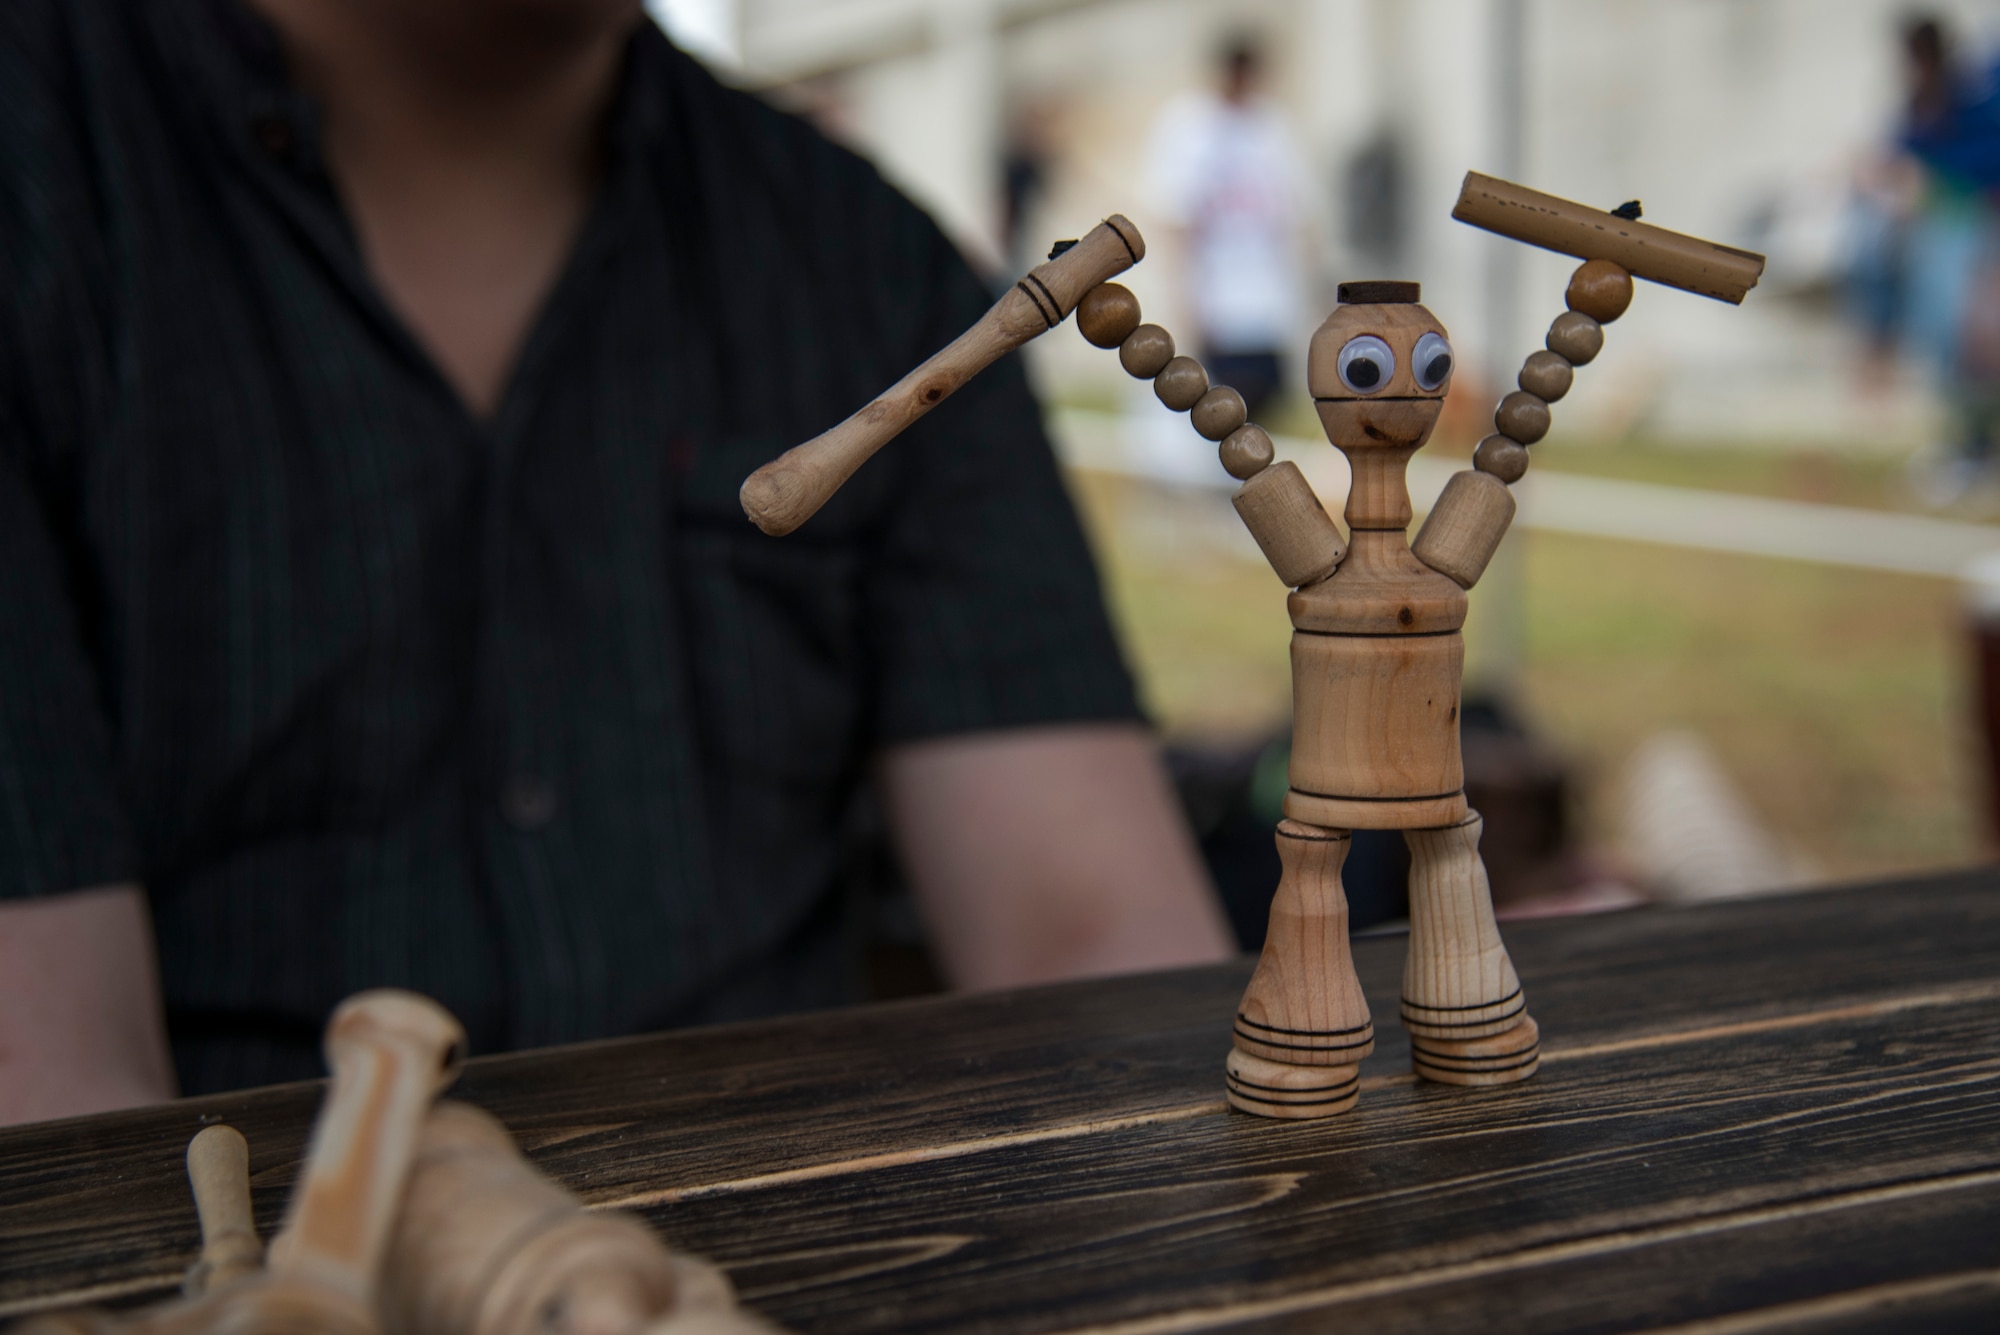 An action figure, ‘Mokko Fighter,’ stands on a table during the Tanabata Festival in Misawa City, Japan, July 26, 2019. The user controls the wooden figure’s arms and legs to simulate a dancing or fighting performance for guest. This attraction compares to a modern-day puppet show. (U.S. Air Force photo by Branden Yamada)